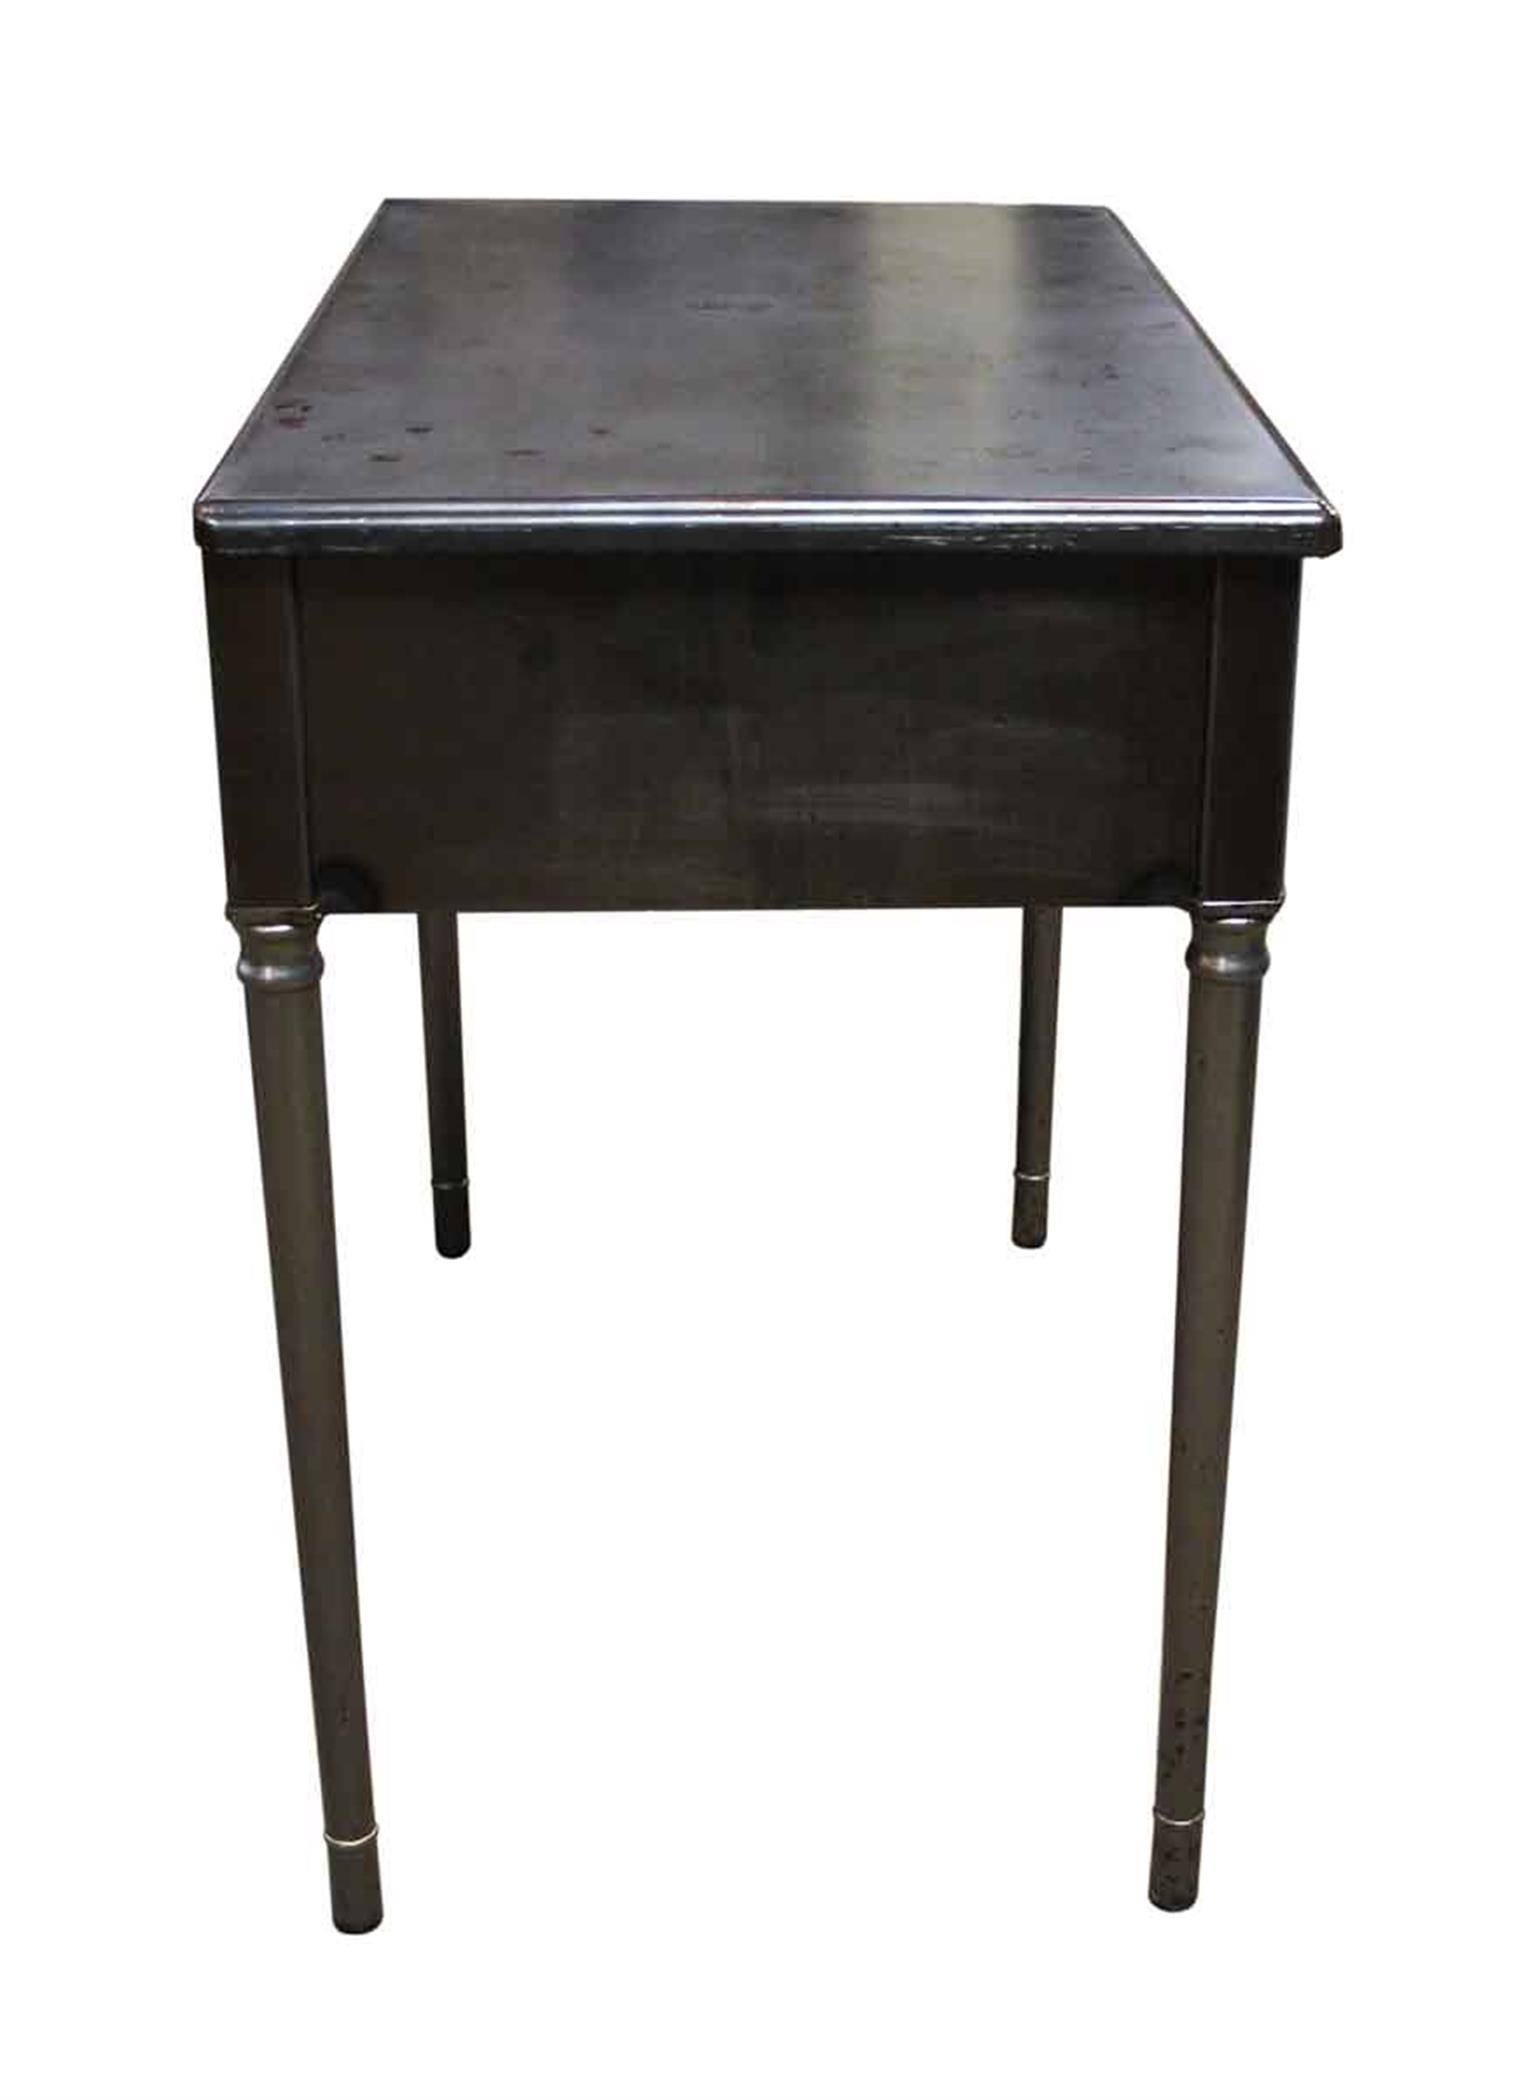 1930s Refinished Steel Industrial Desk with One Drawer 1